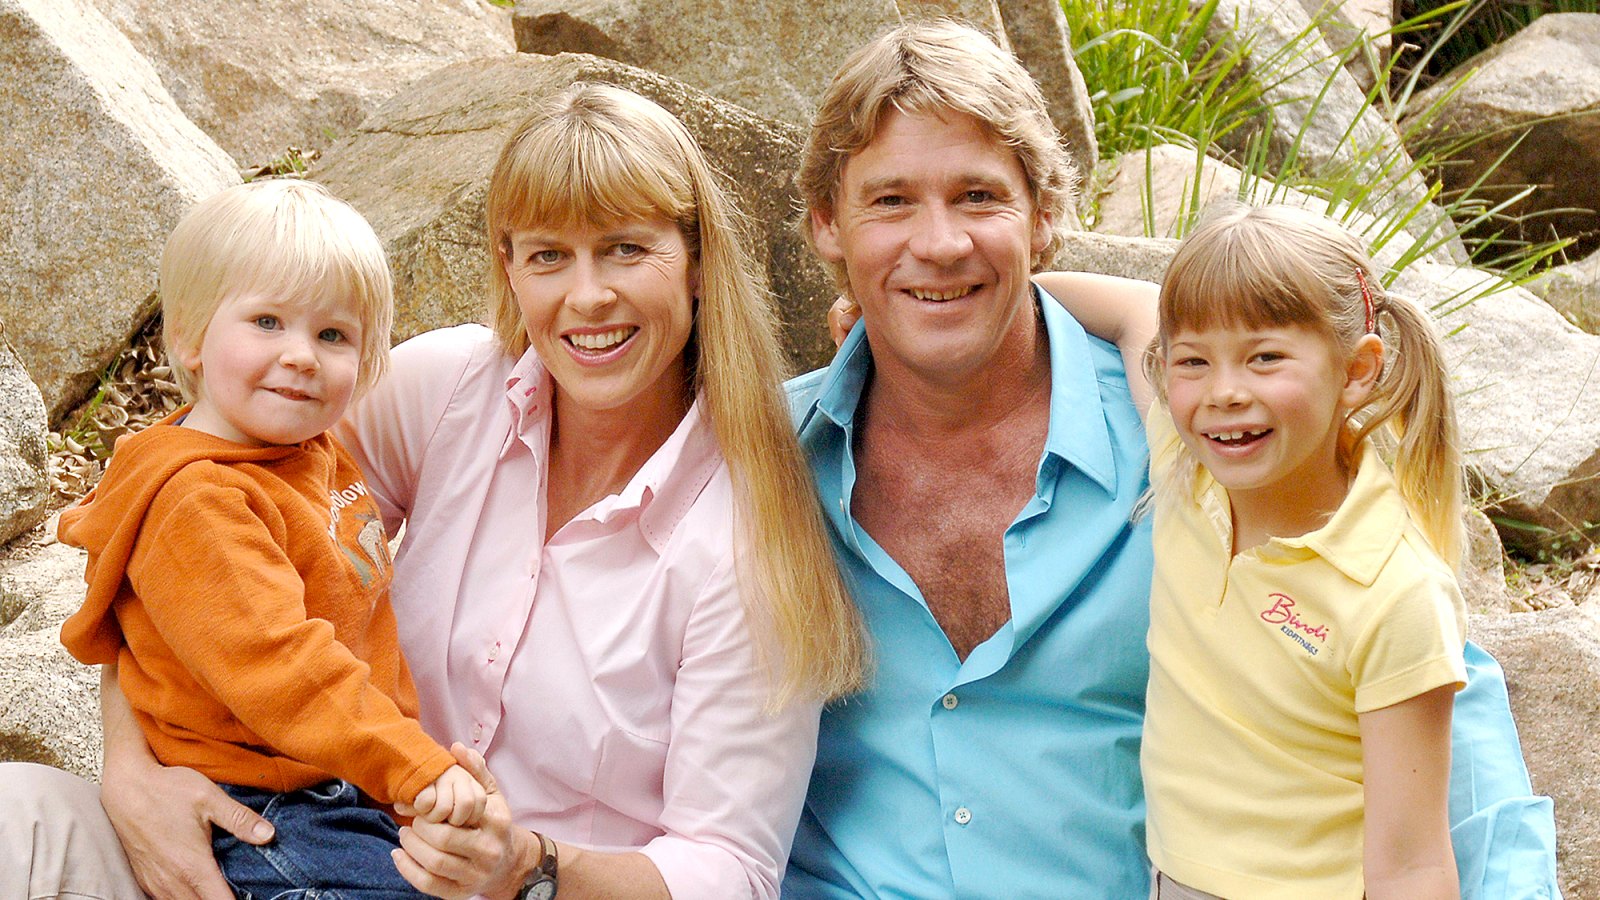 The-Irwin-Family-Pays-Emotional-Tribute-to-Steve-on-His-57th-Birthday